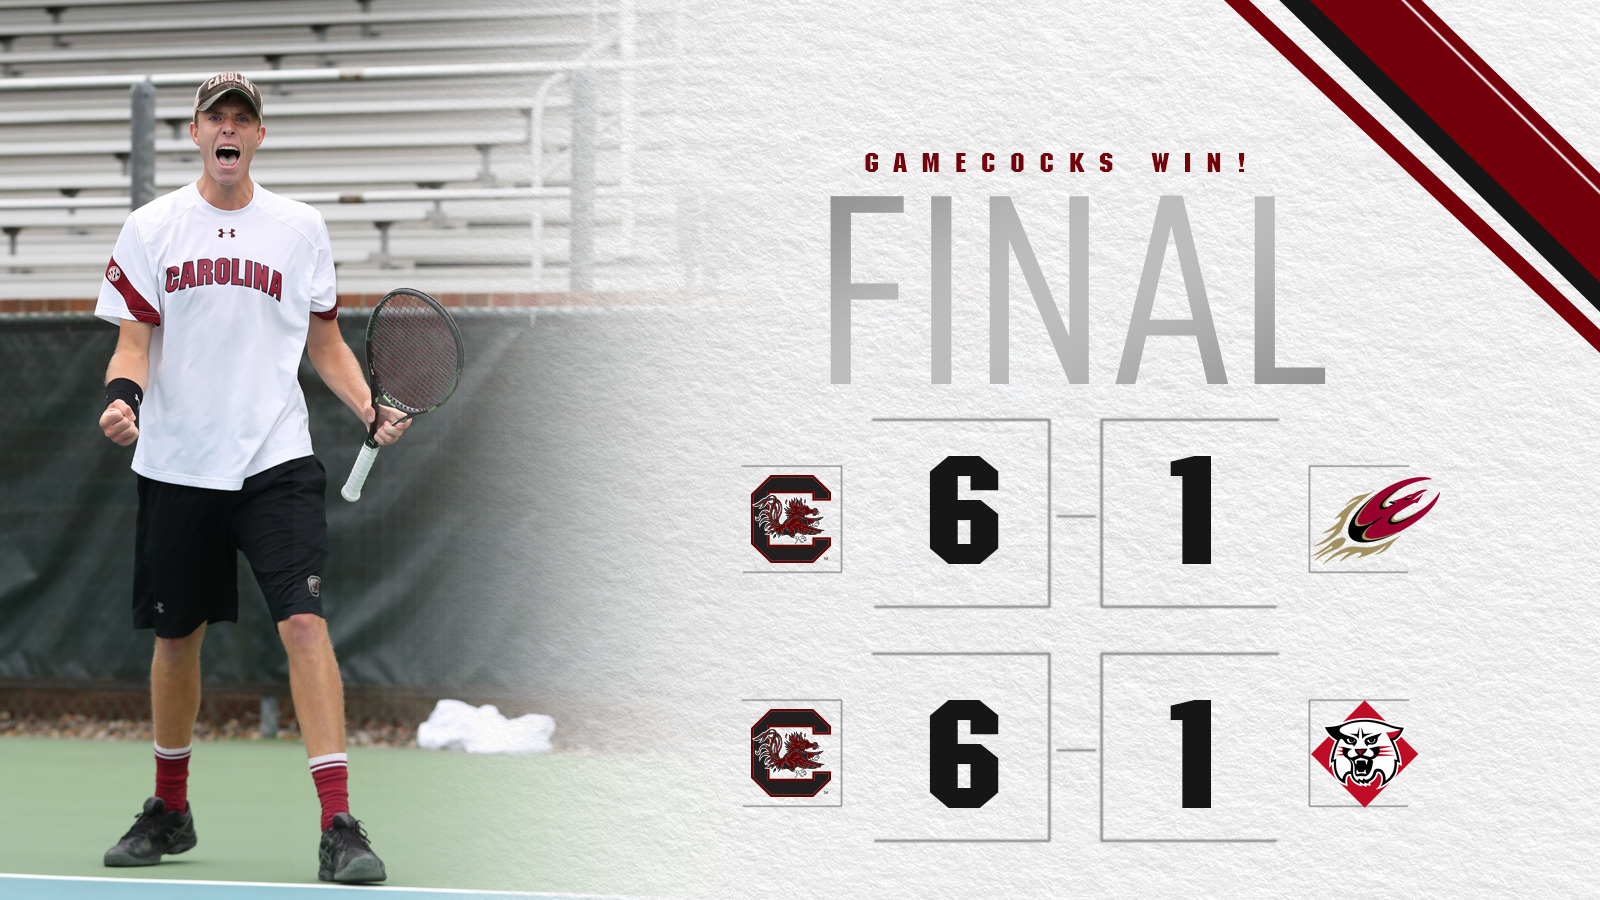 Gamecocks Improve to 4-0 After Doubleheader